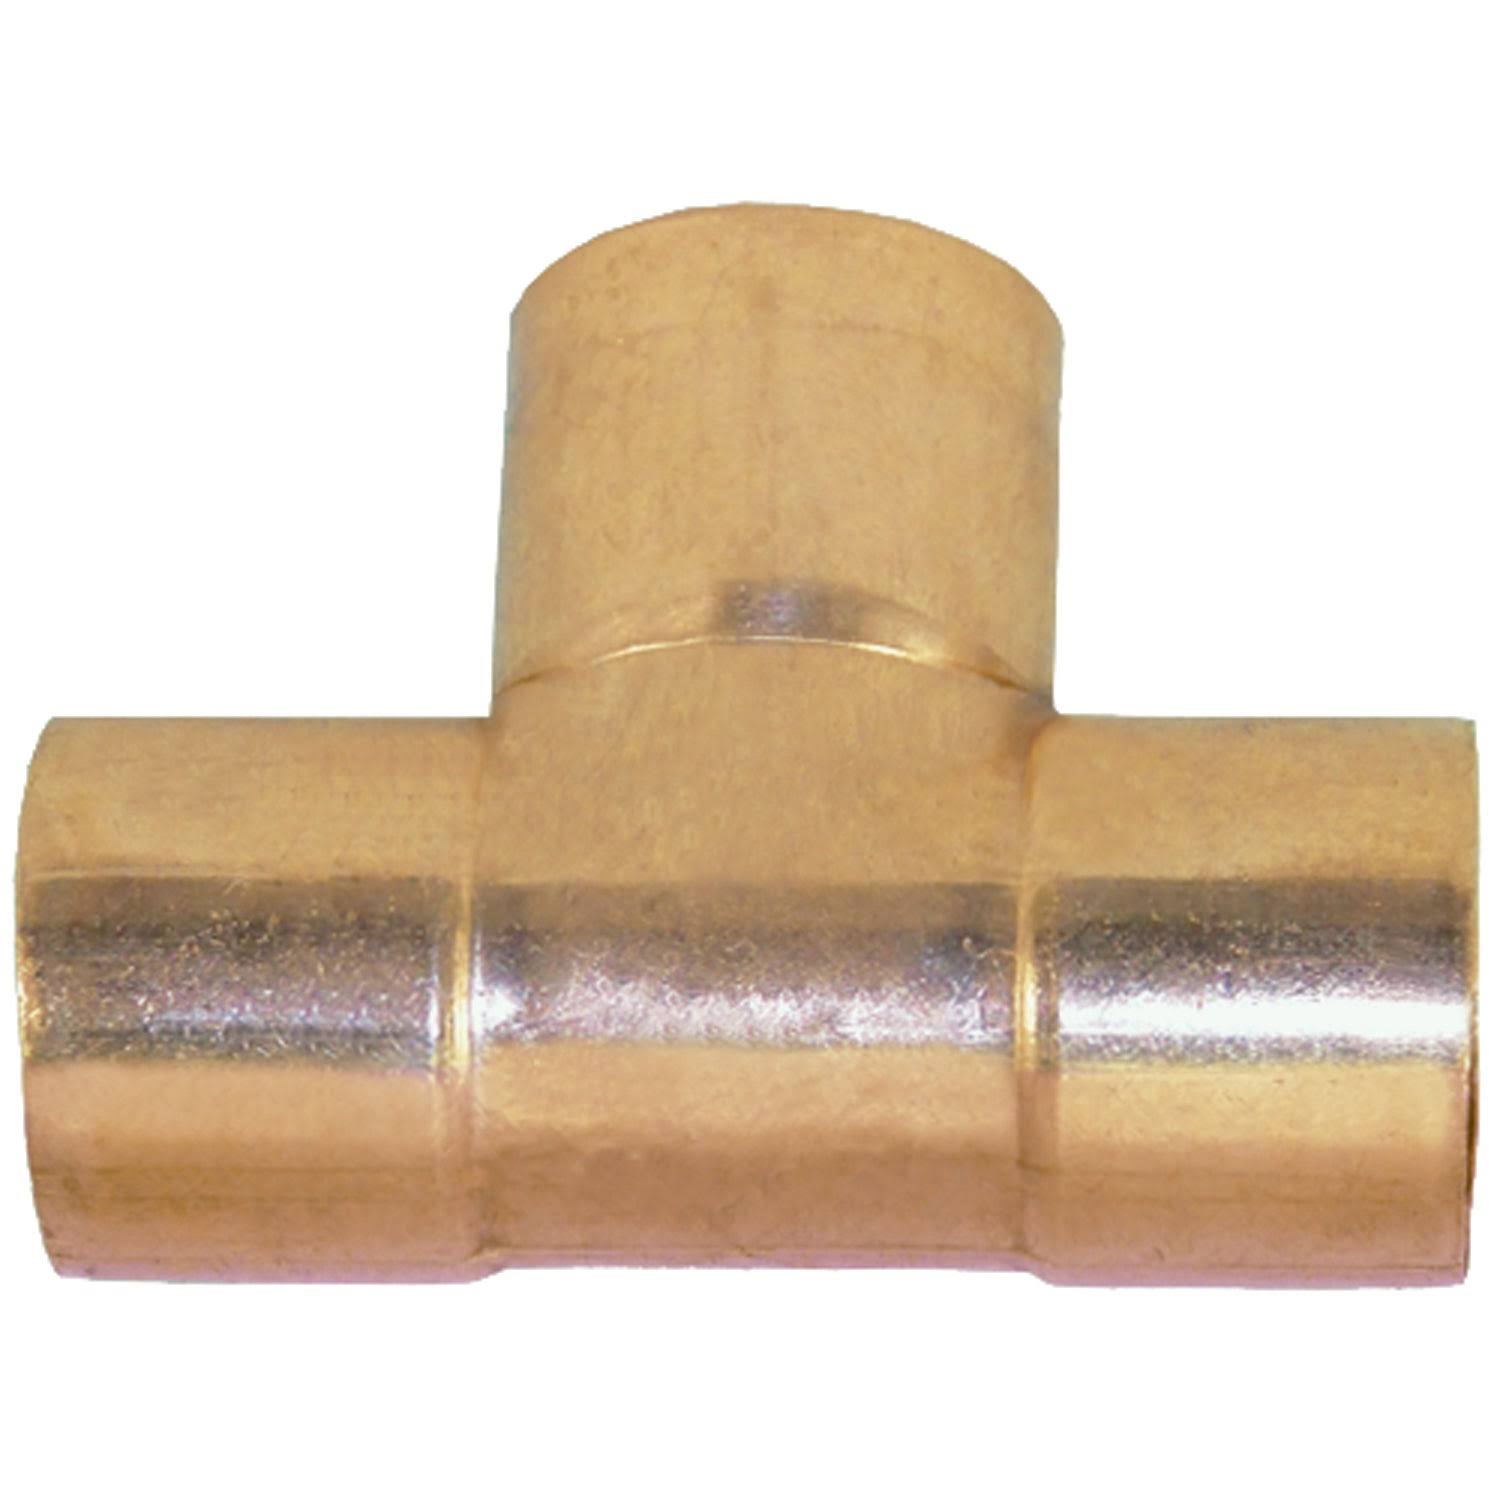 Elkhart Products Copper Tee - 1"